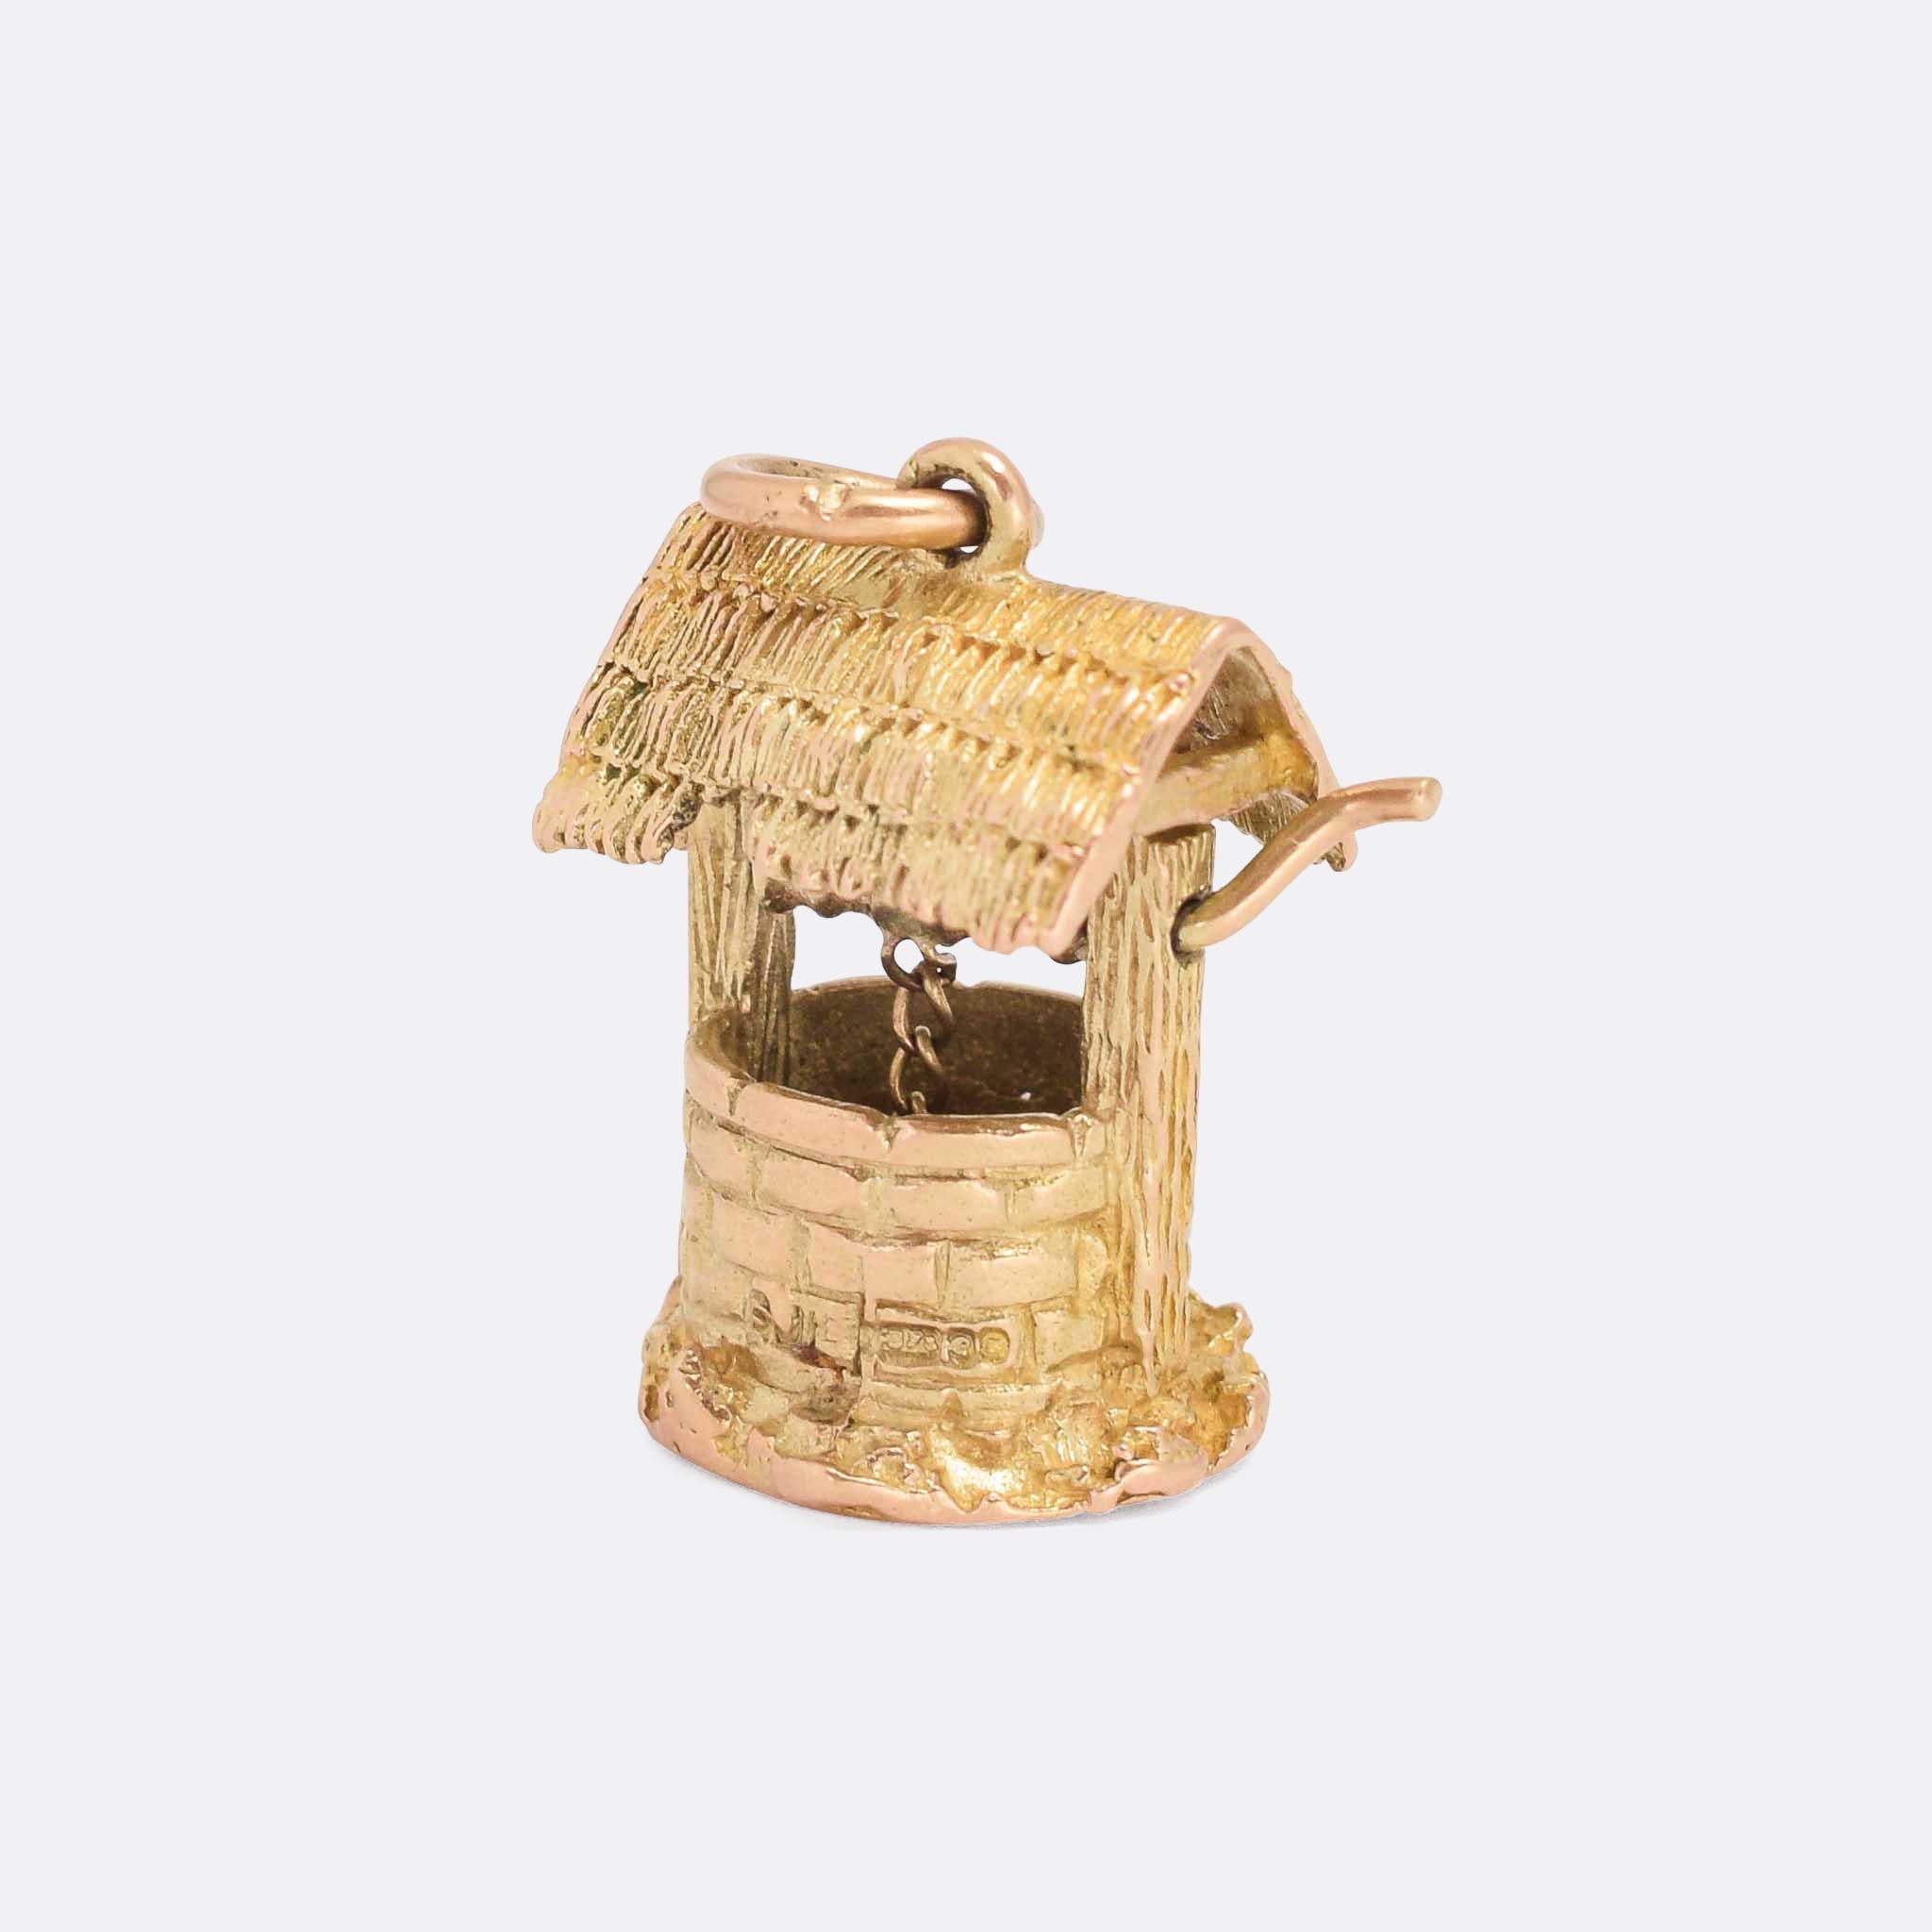 A fine 9k  gold wishing well charm dating from the 1970s. It features a working winding handle that lifts the bucket up and down. Offered on a fine 9k gold chain.

MEASUREMENTS 
1.5 x 2.2cm (width x height)

WEIGHT 
6.6g

MARKS 
English hallmarks